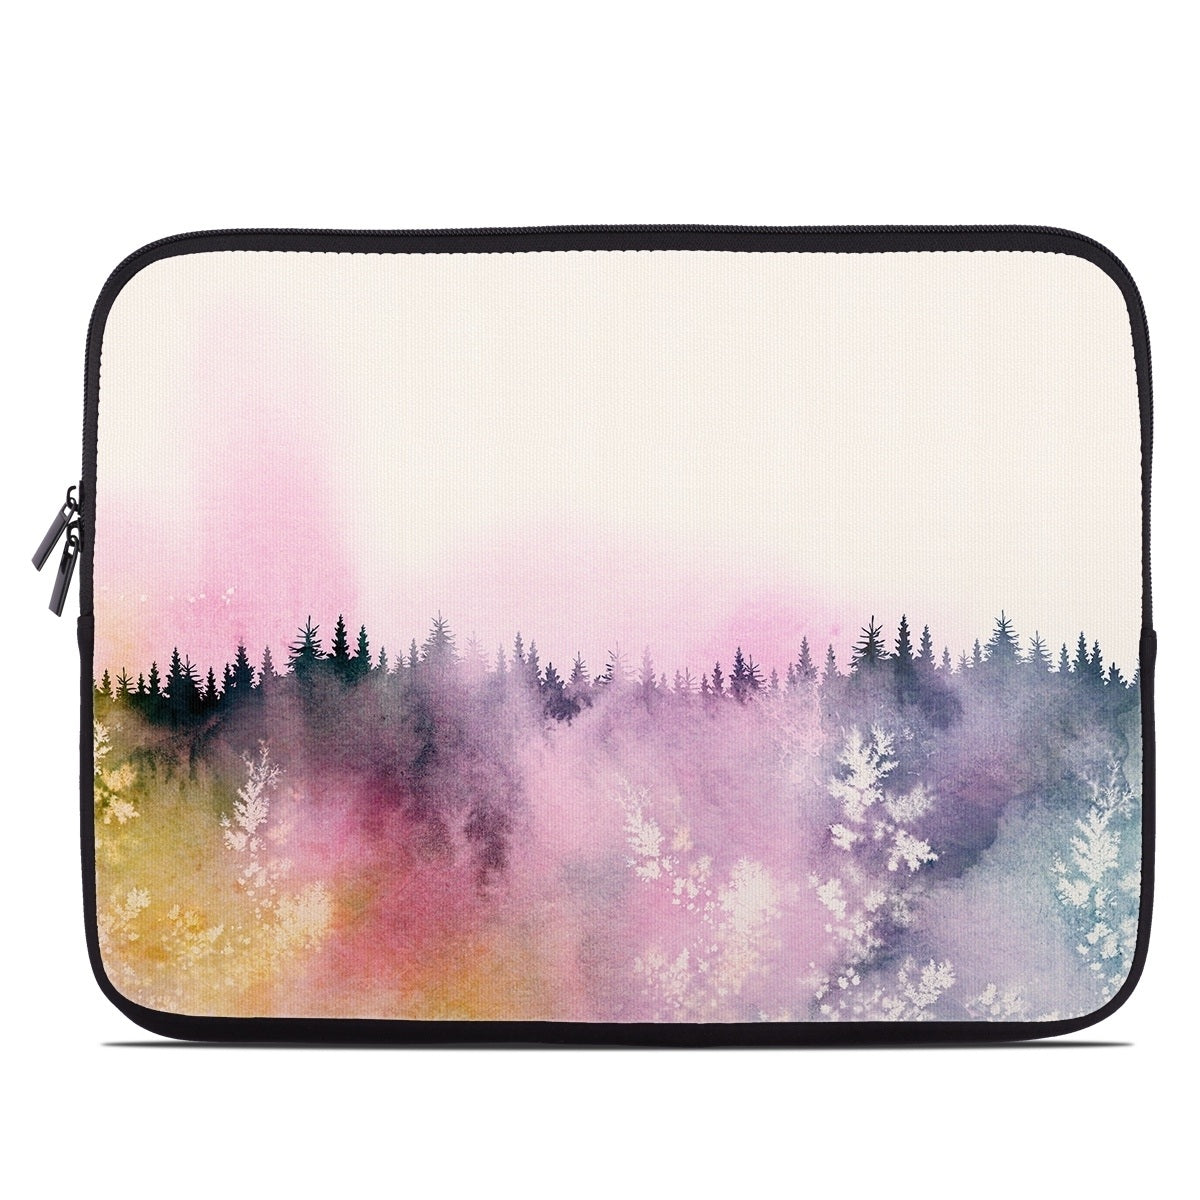 Dreaming of You - Laptop Sleeve